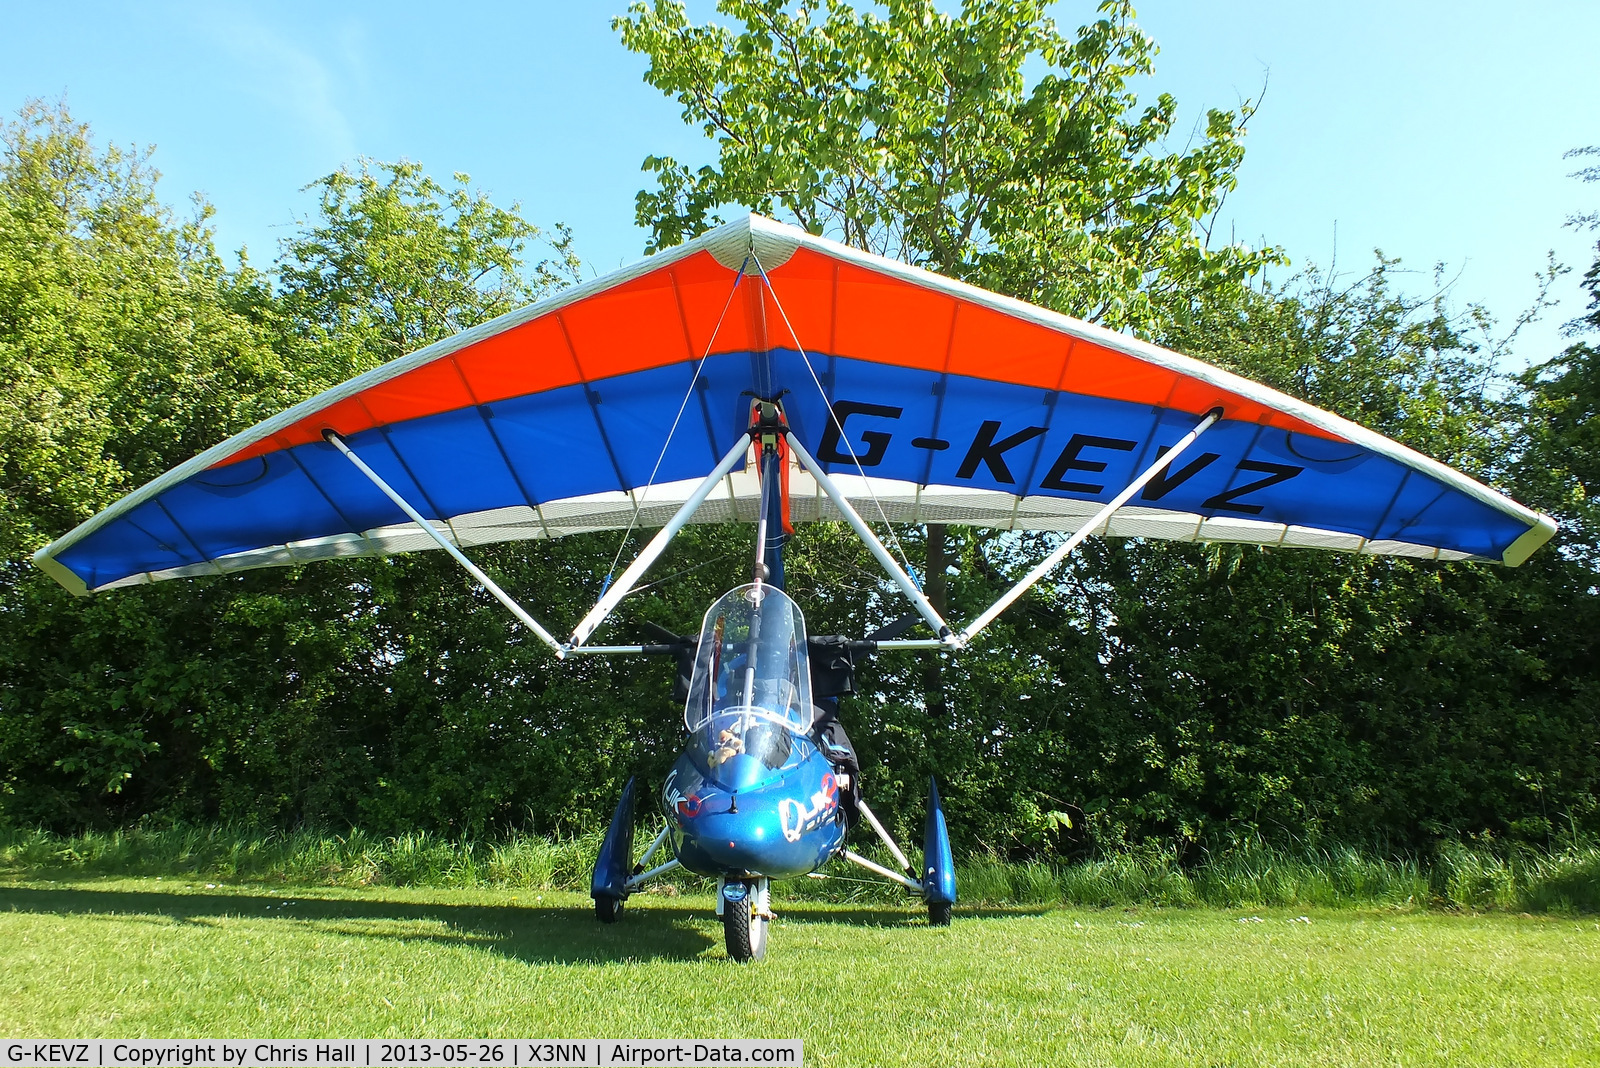 G-KEVZ, 2011 P&M Aviation QuikR C/N 8598, visitor to Stoke Golding airfield